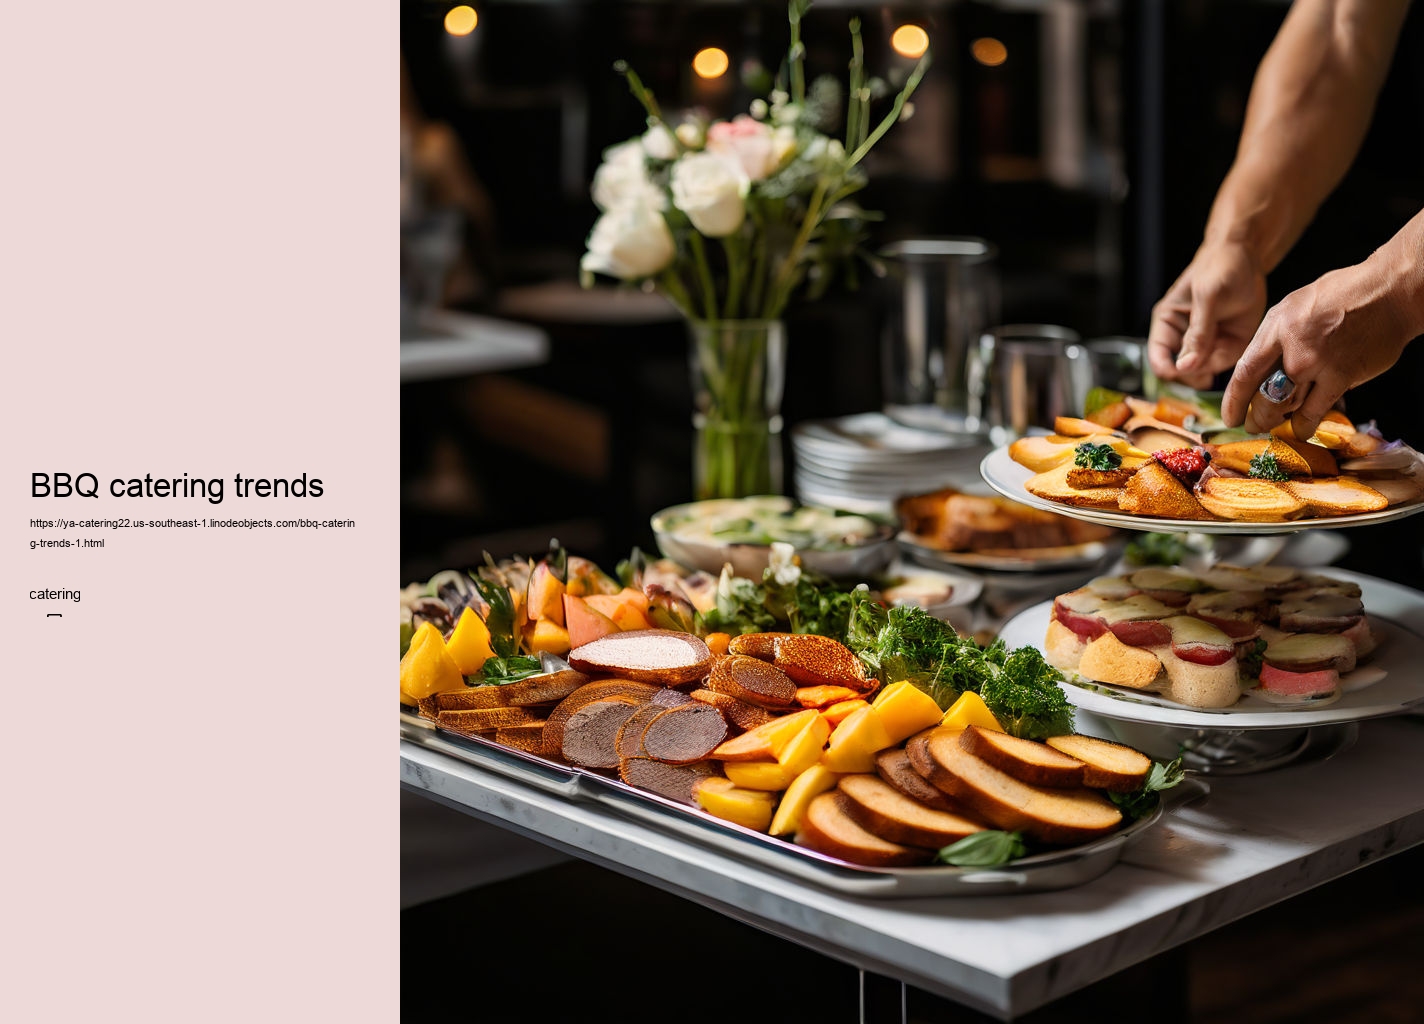 BBQ catering trends